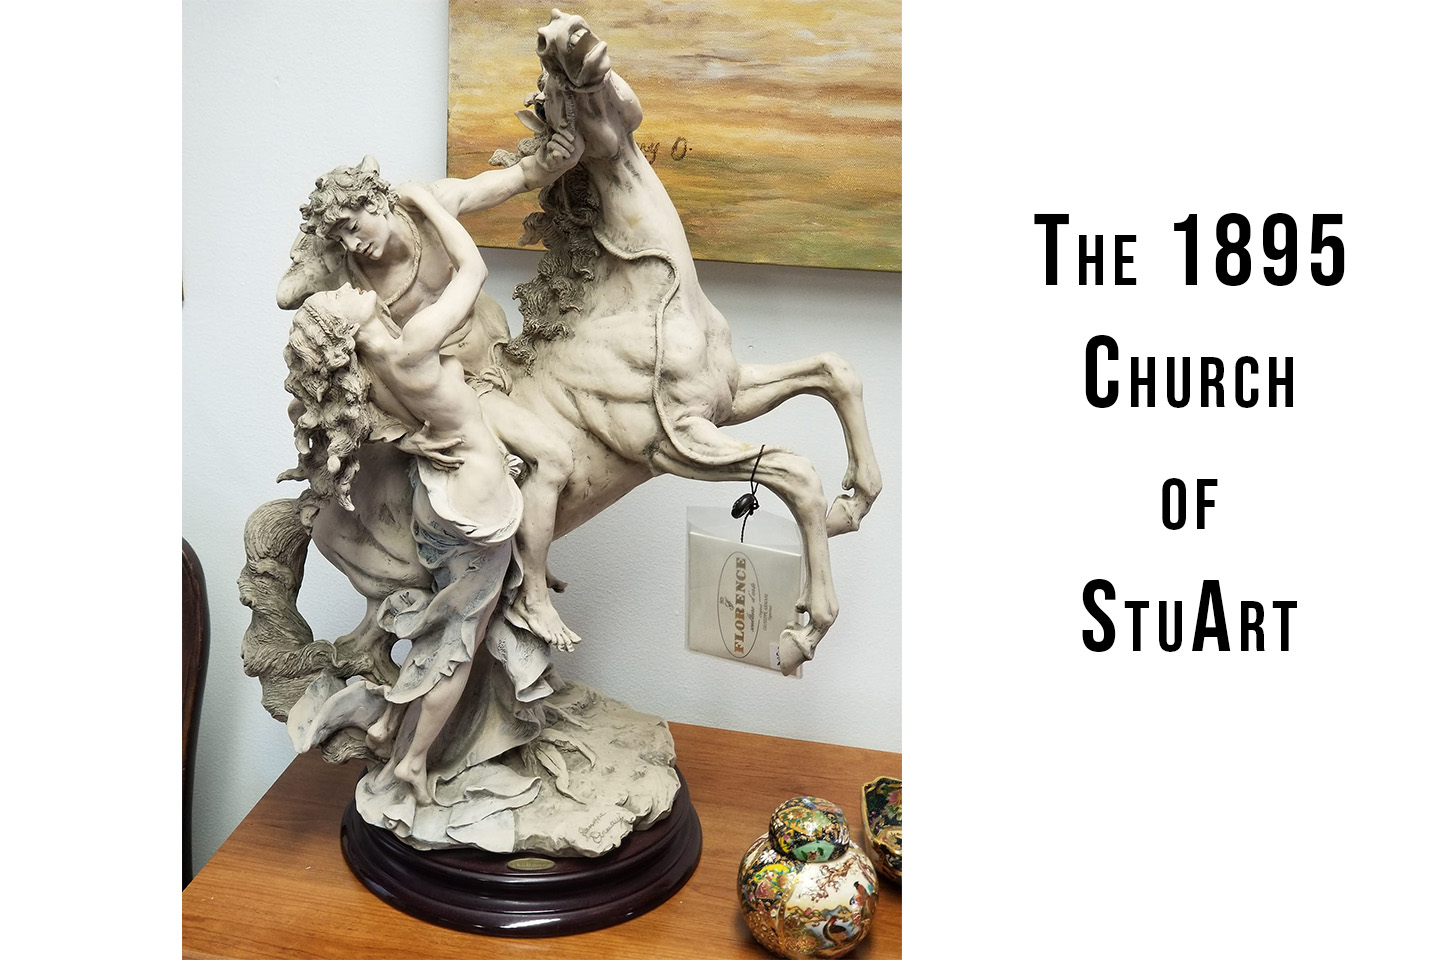 The 1895 Church of Stuart - historic building in Downtown Stuart, Martin County, Florida; art studio and gallery on the Treasure Coast. Supporting our local artists and the community's heritage.